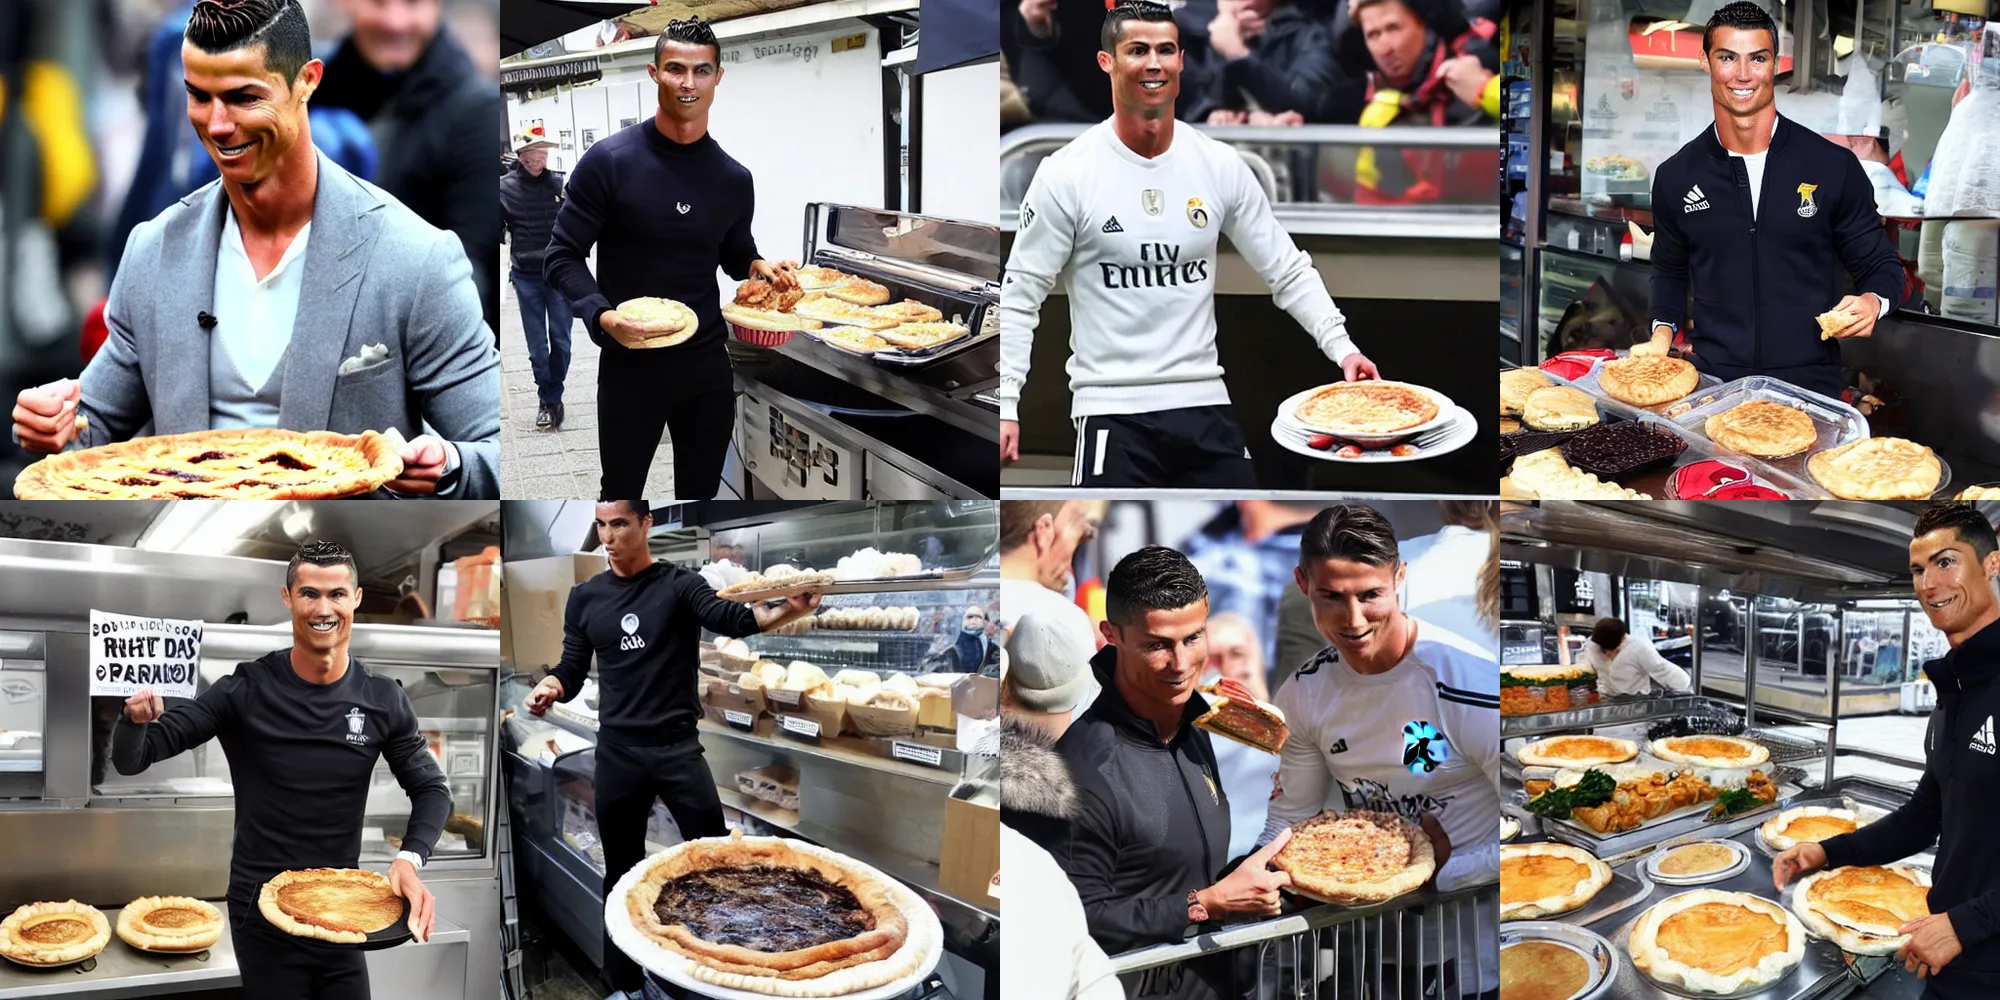 Prompt: Cristiano Ronaldo sells pies on the market